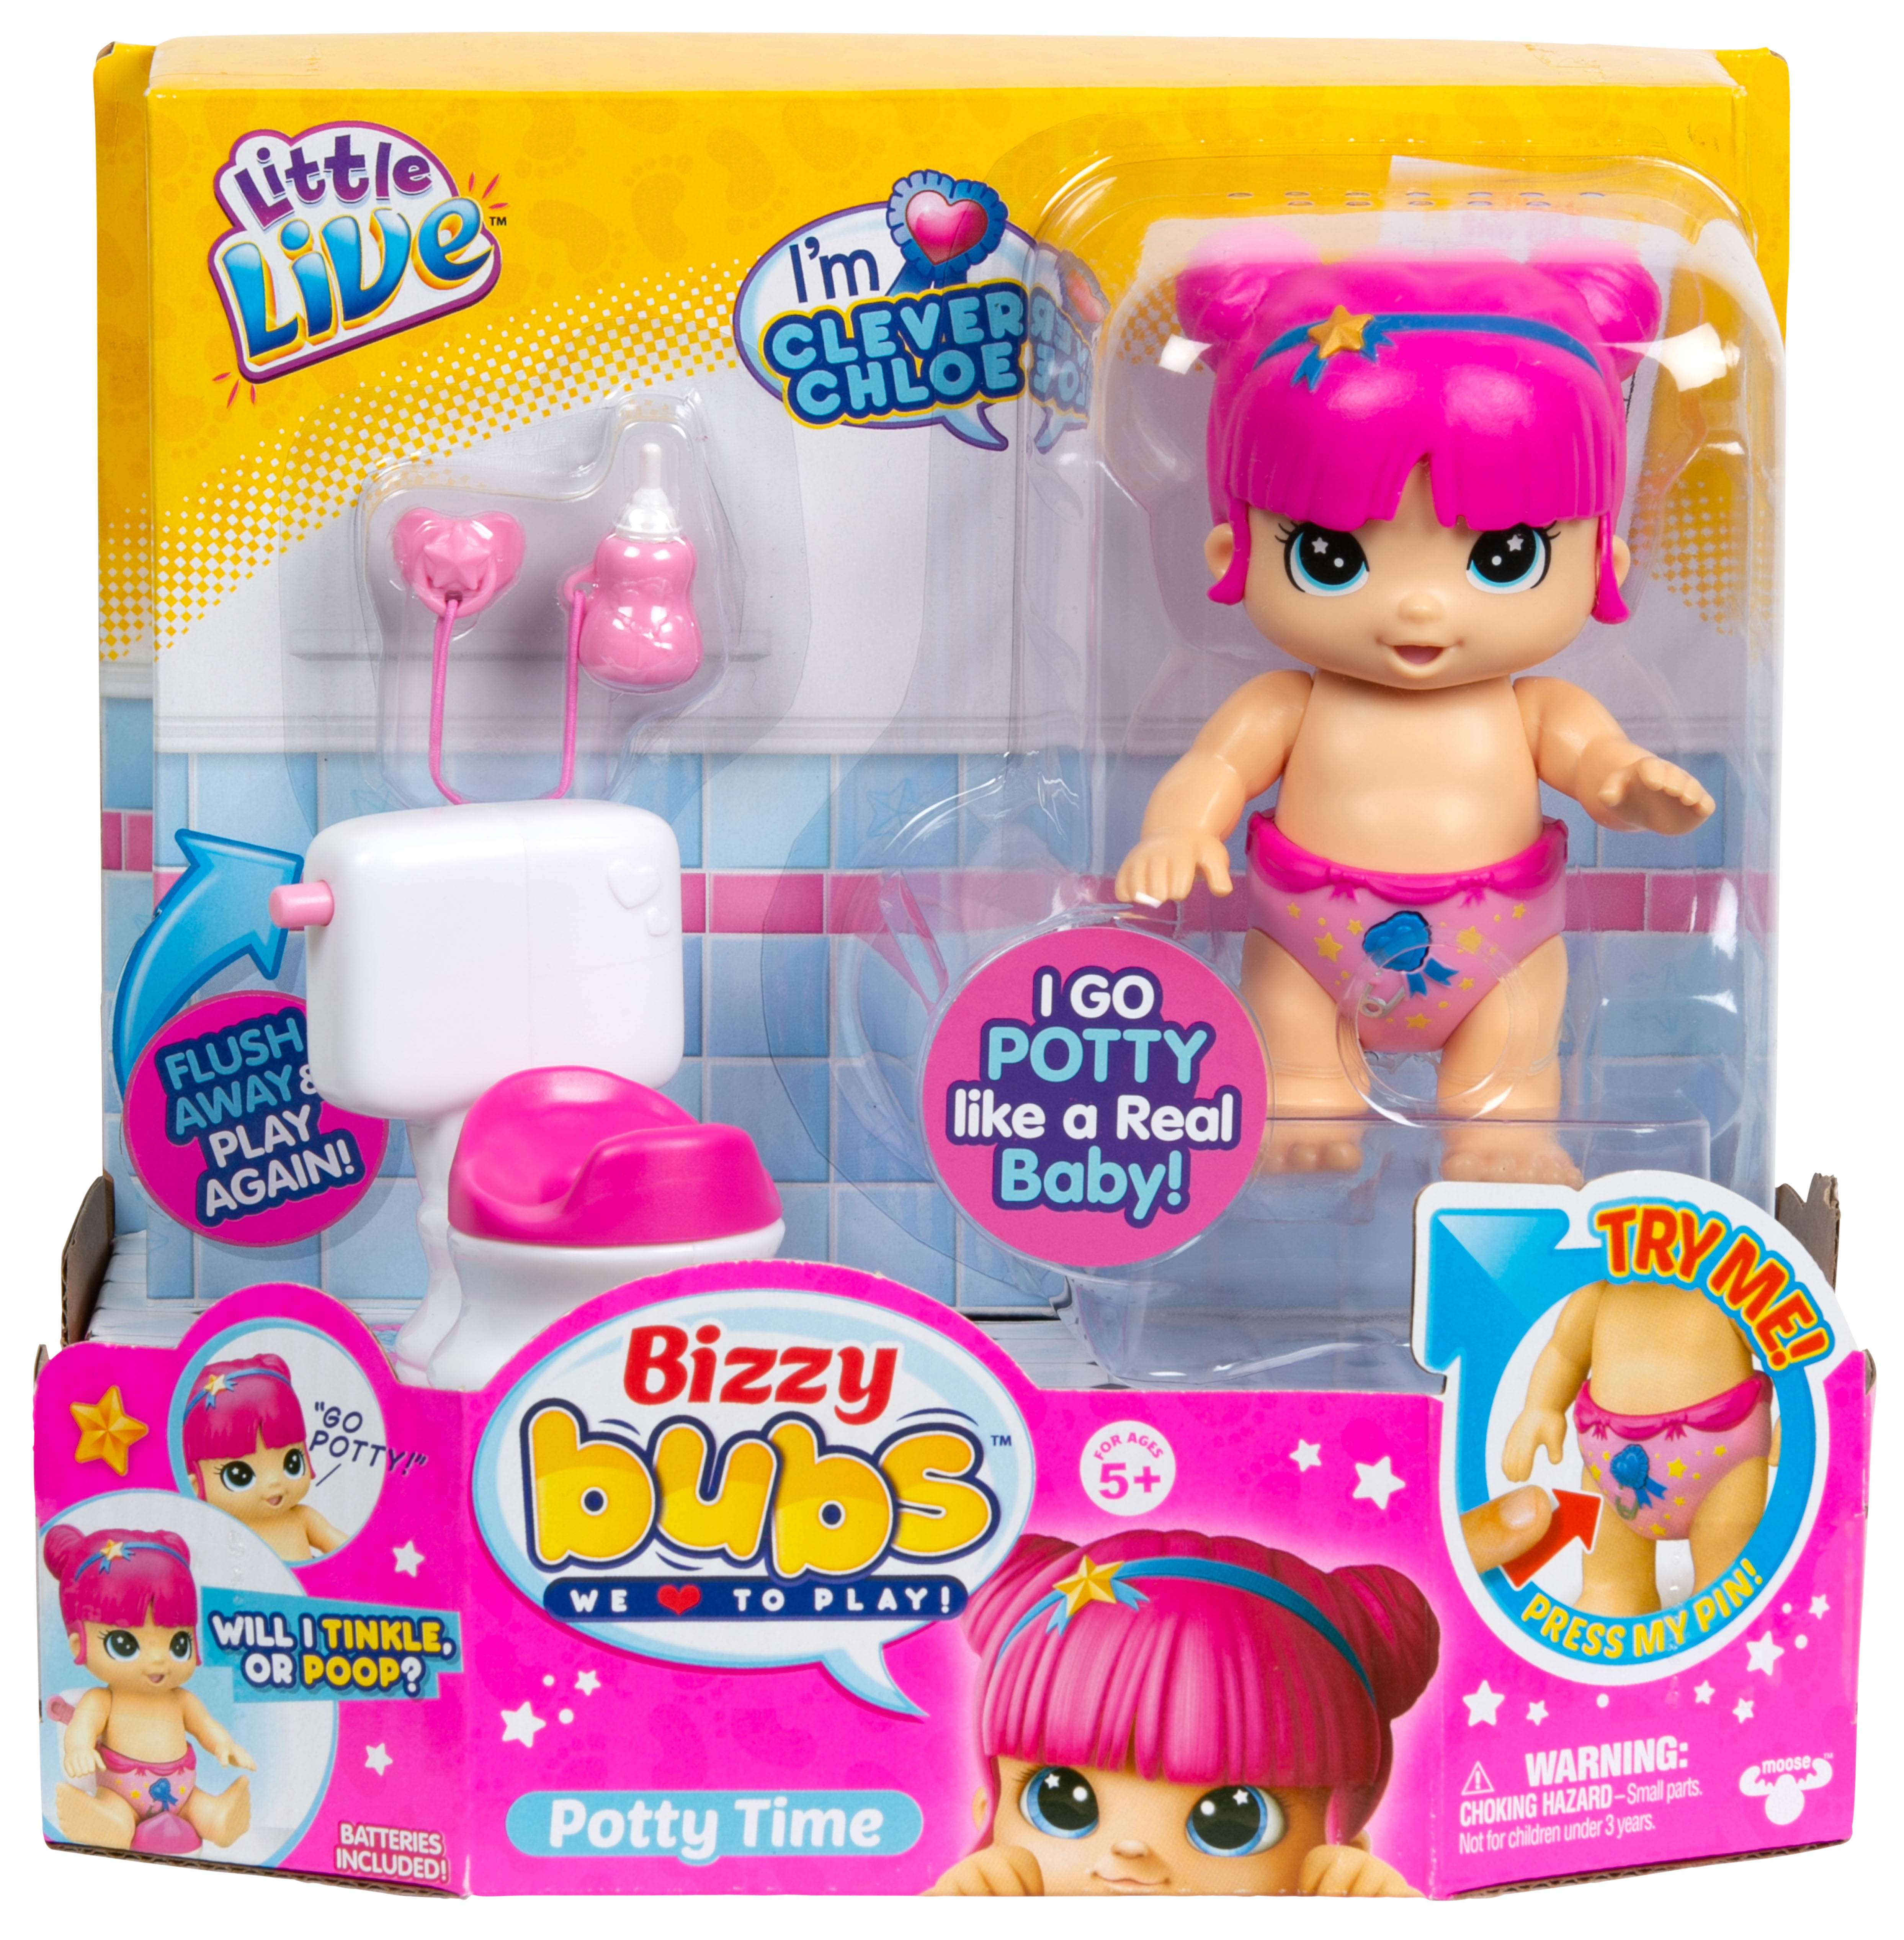 Little Live Bizzy Bubs Baby Play Set, Clever Chloe Potty Time - image 4 of 10